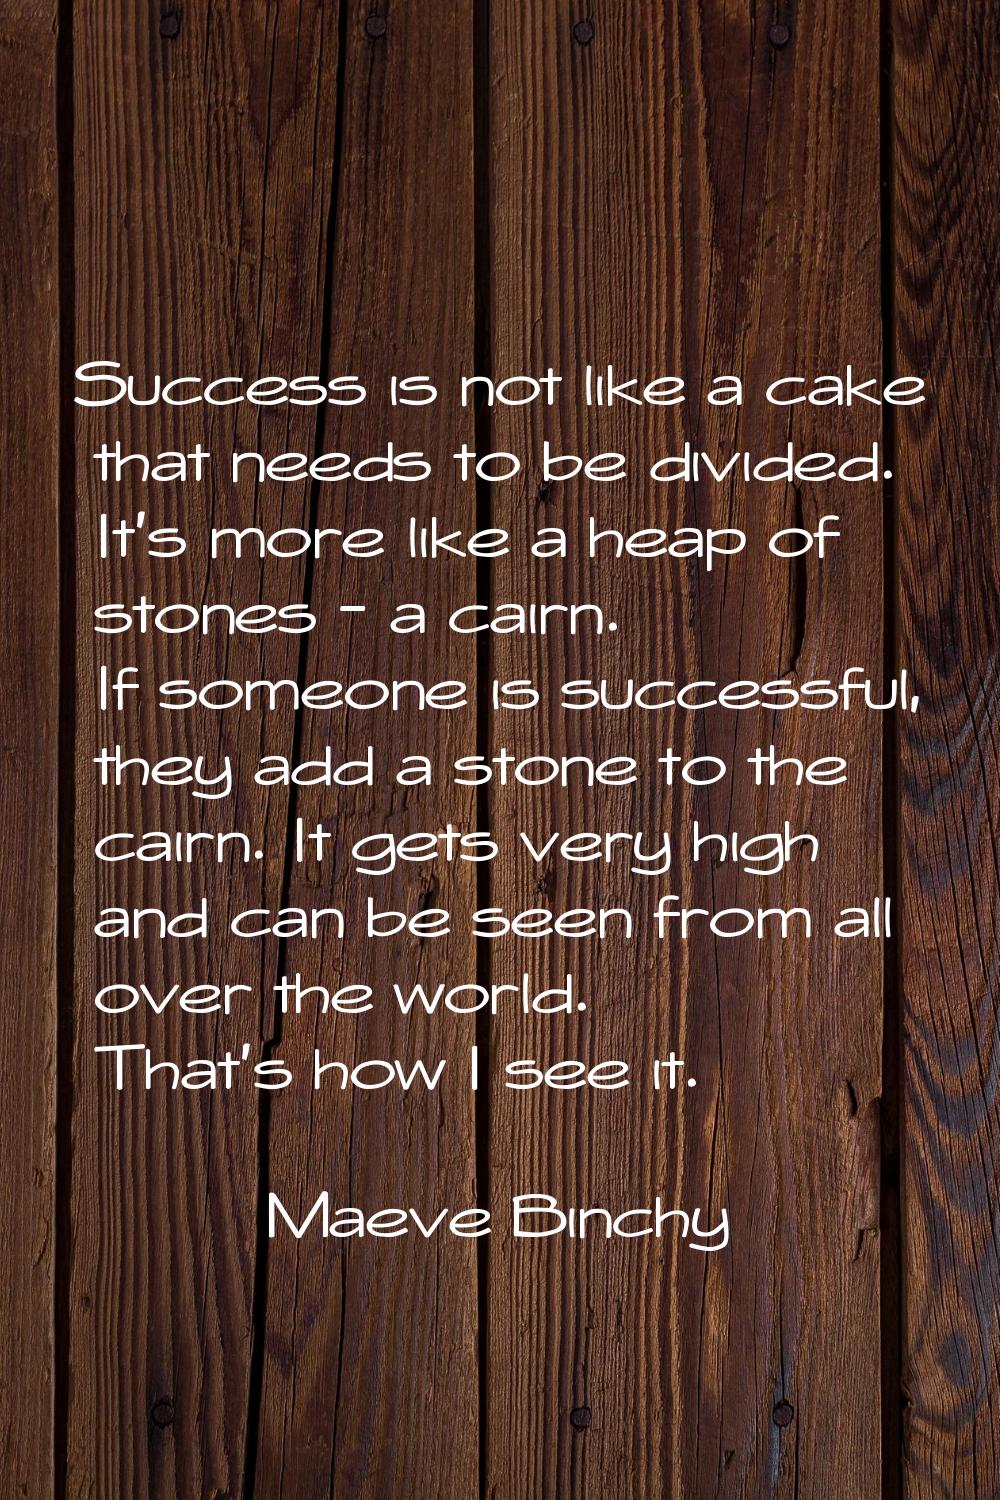 Success is not like a cake that needs to be divided. It's more like a heap of stones - a cairn. If 